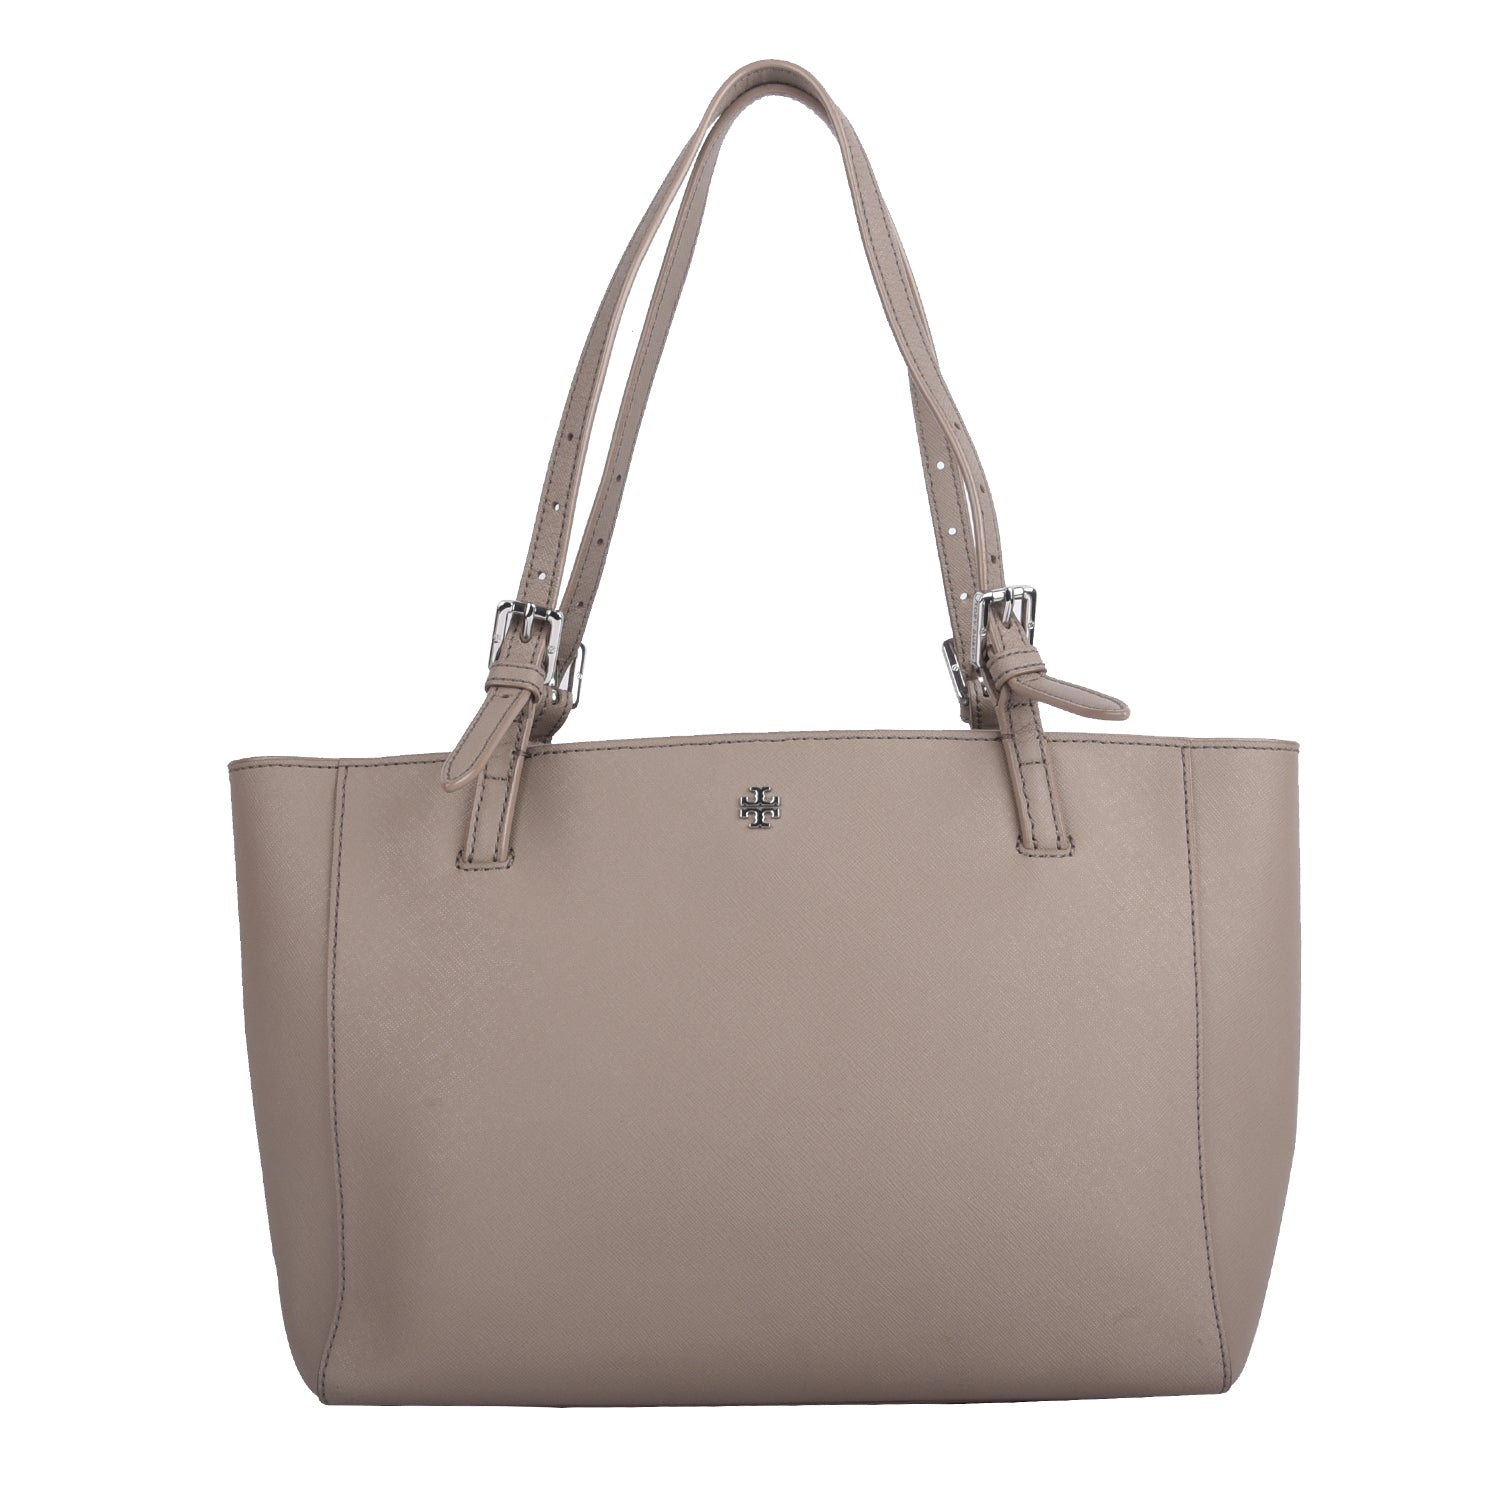 Tory Burch Grey Leather Tote Bag